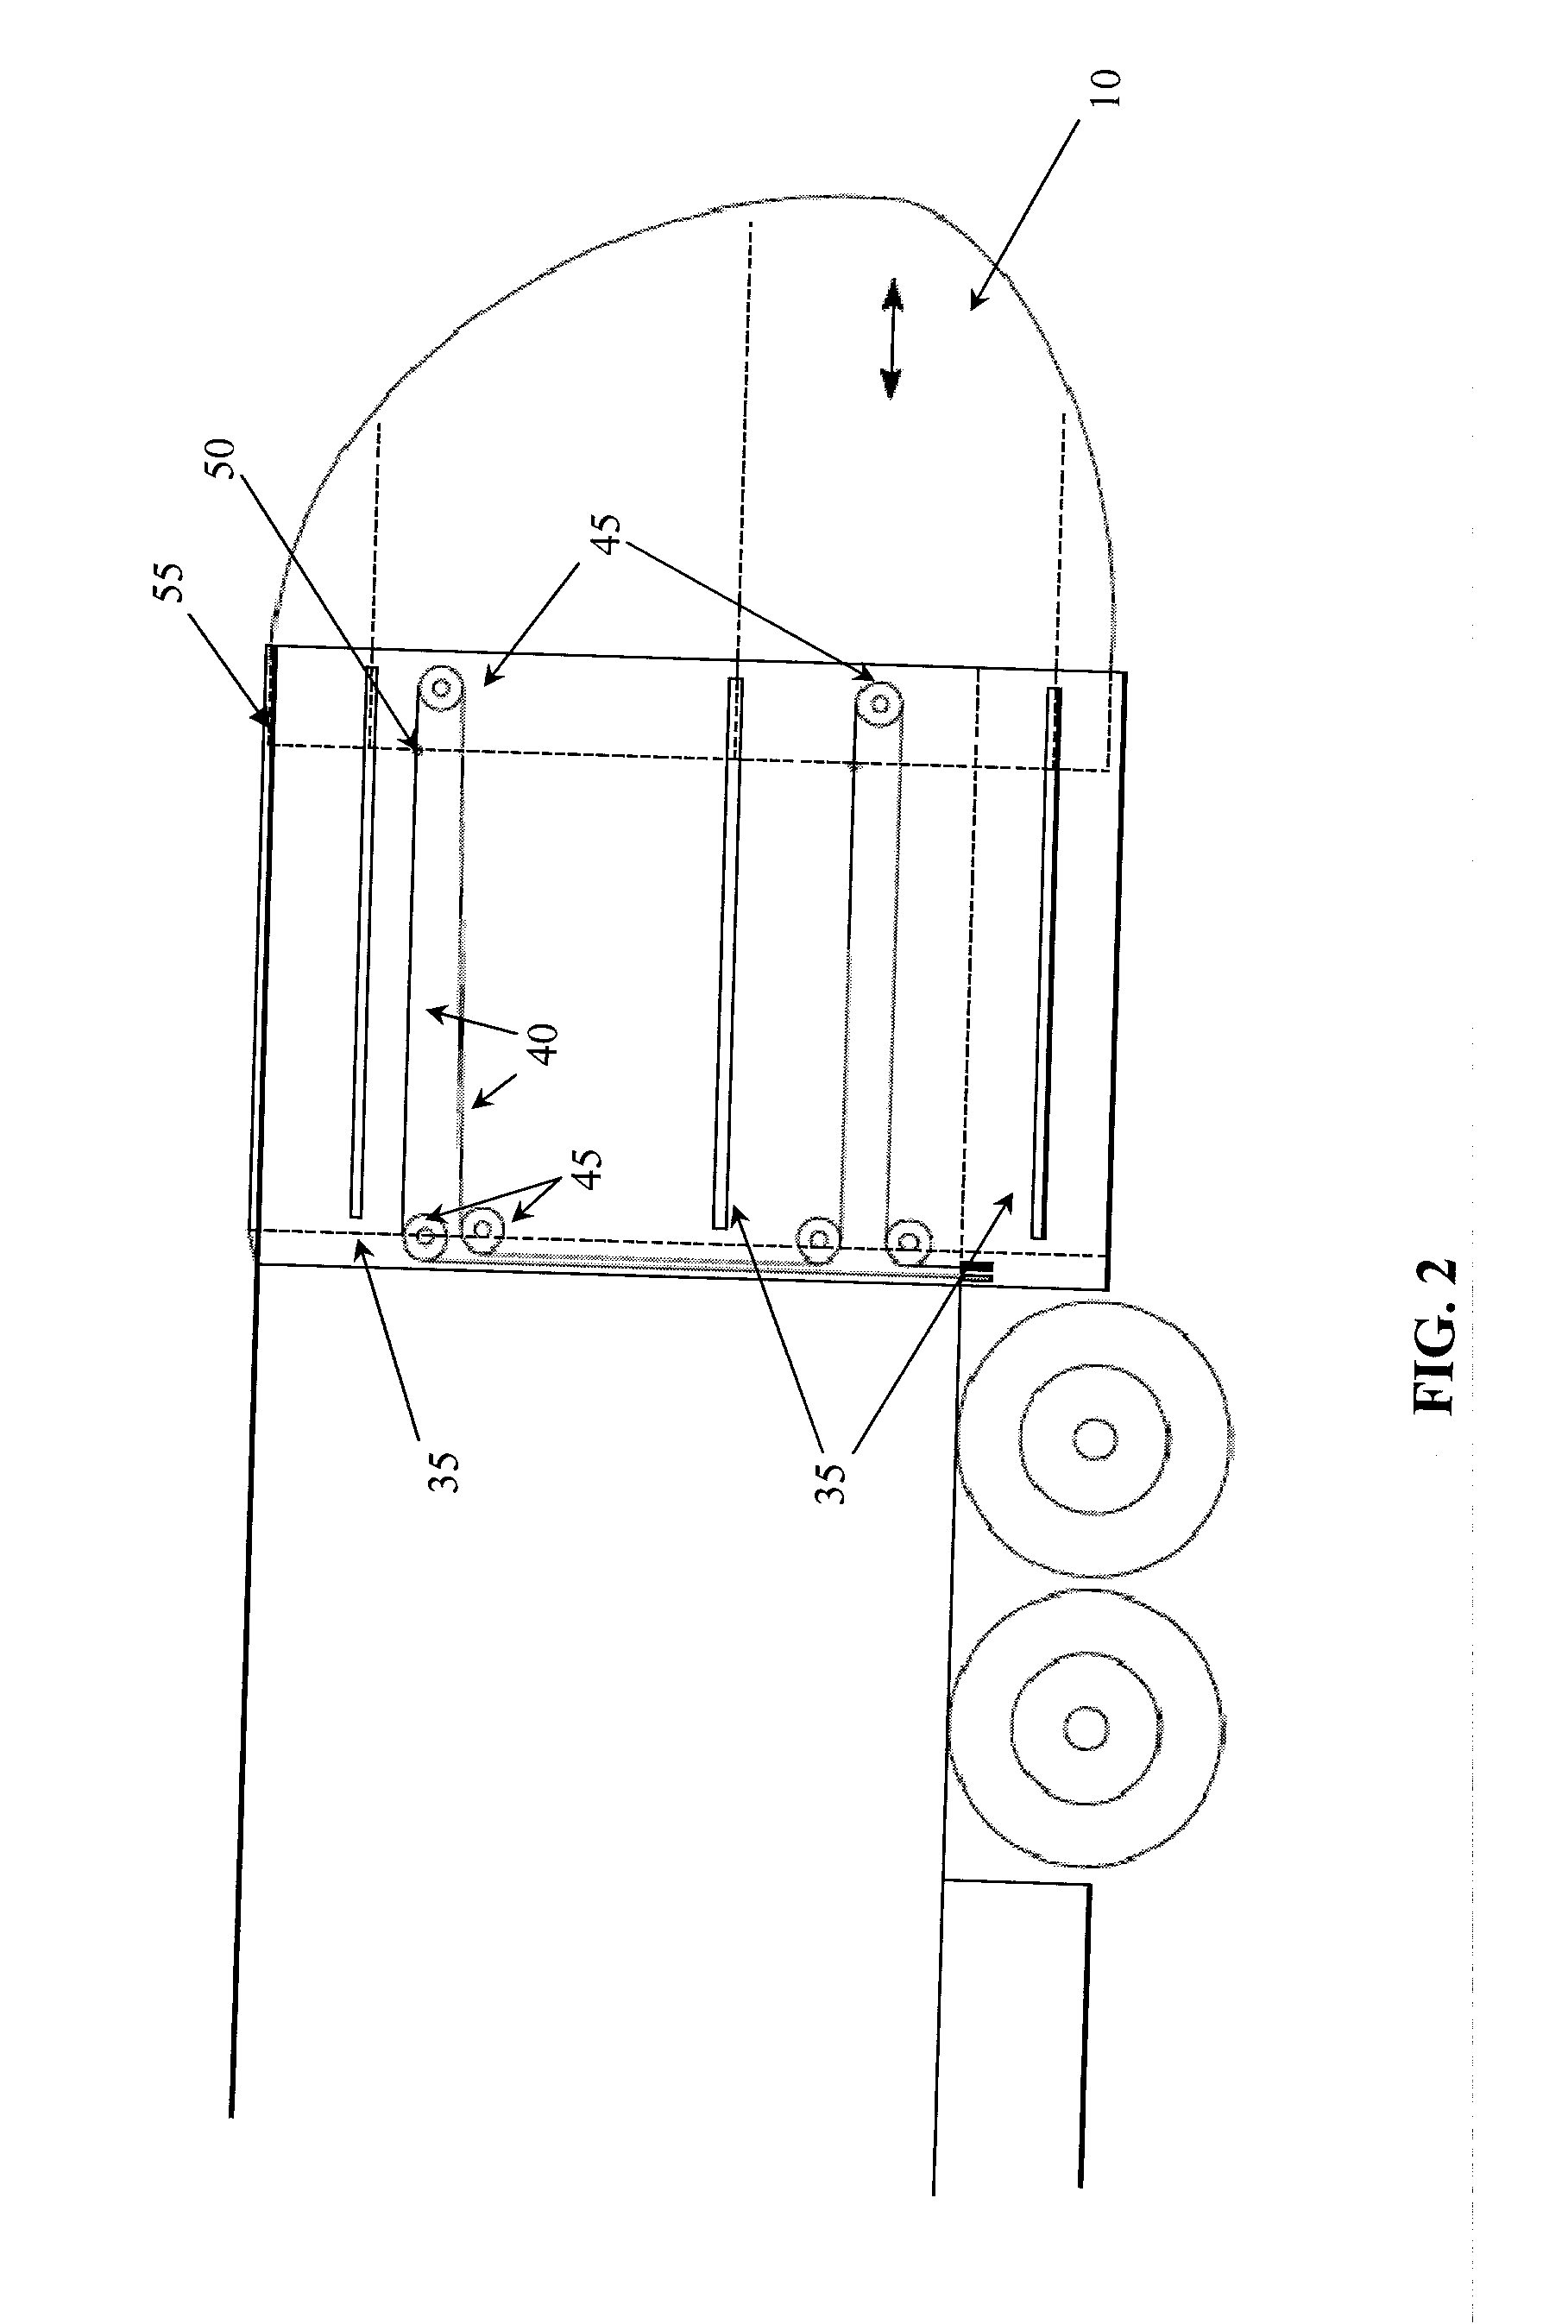 Drag-reducing device